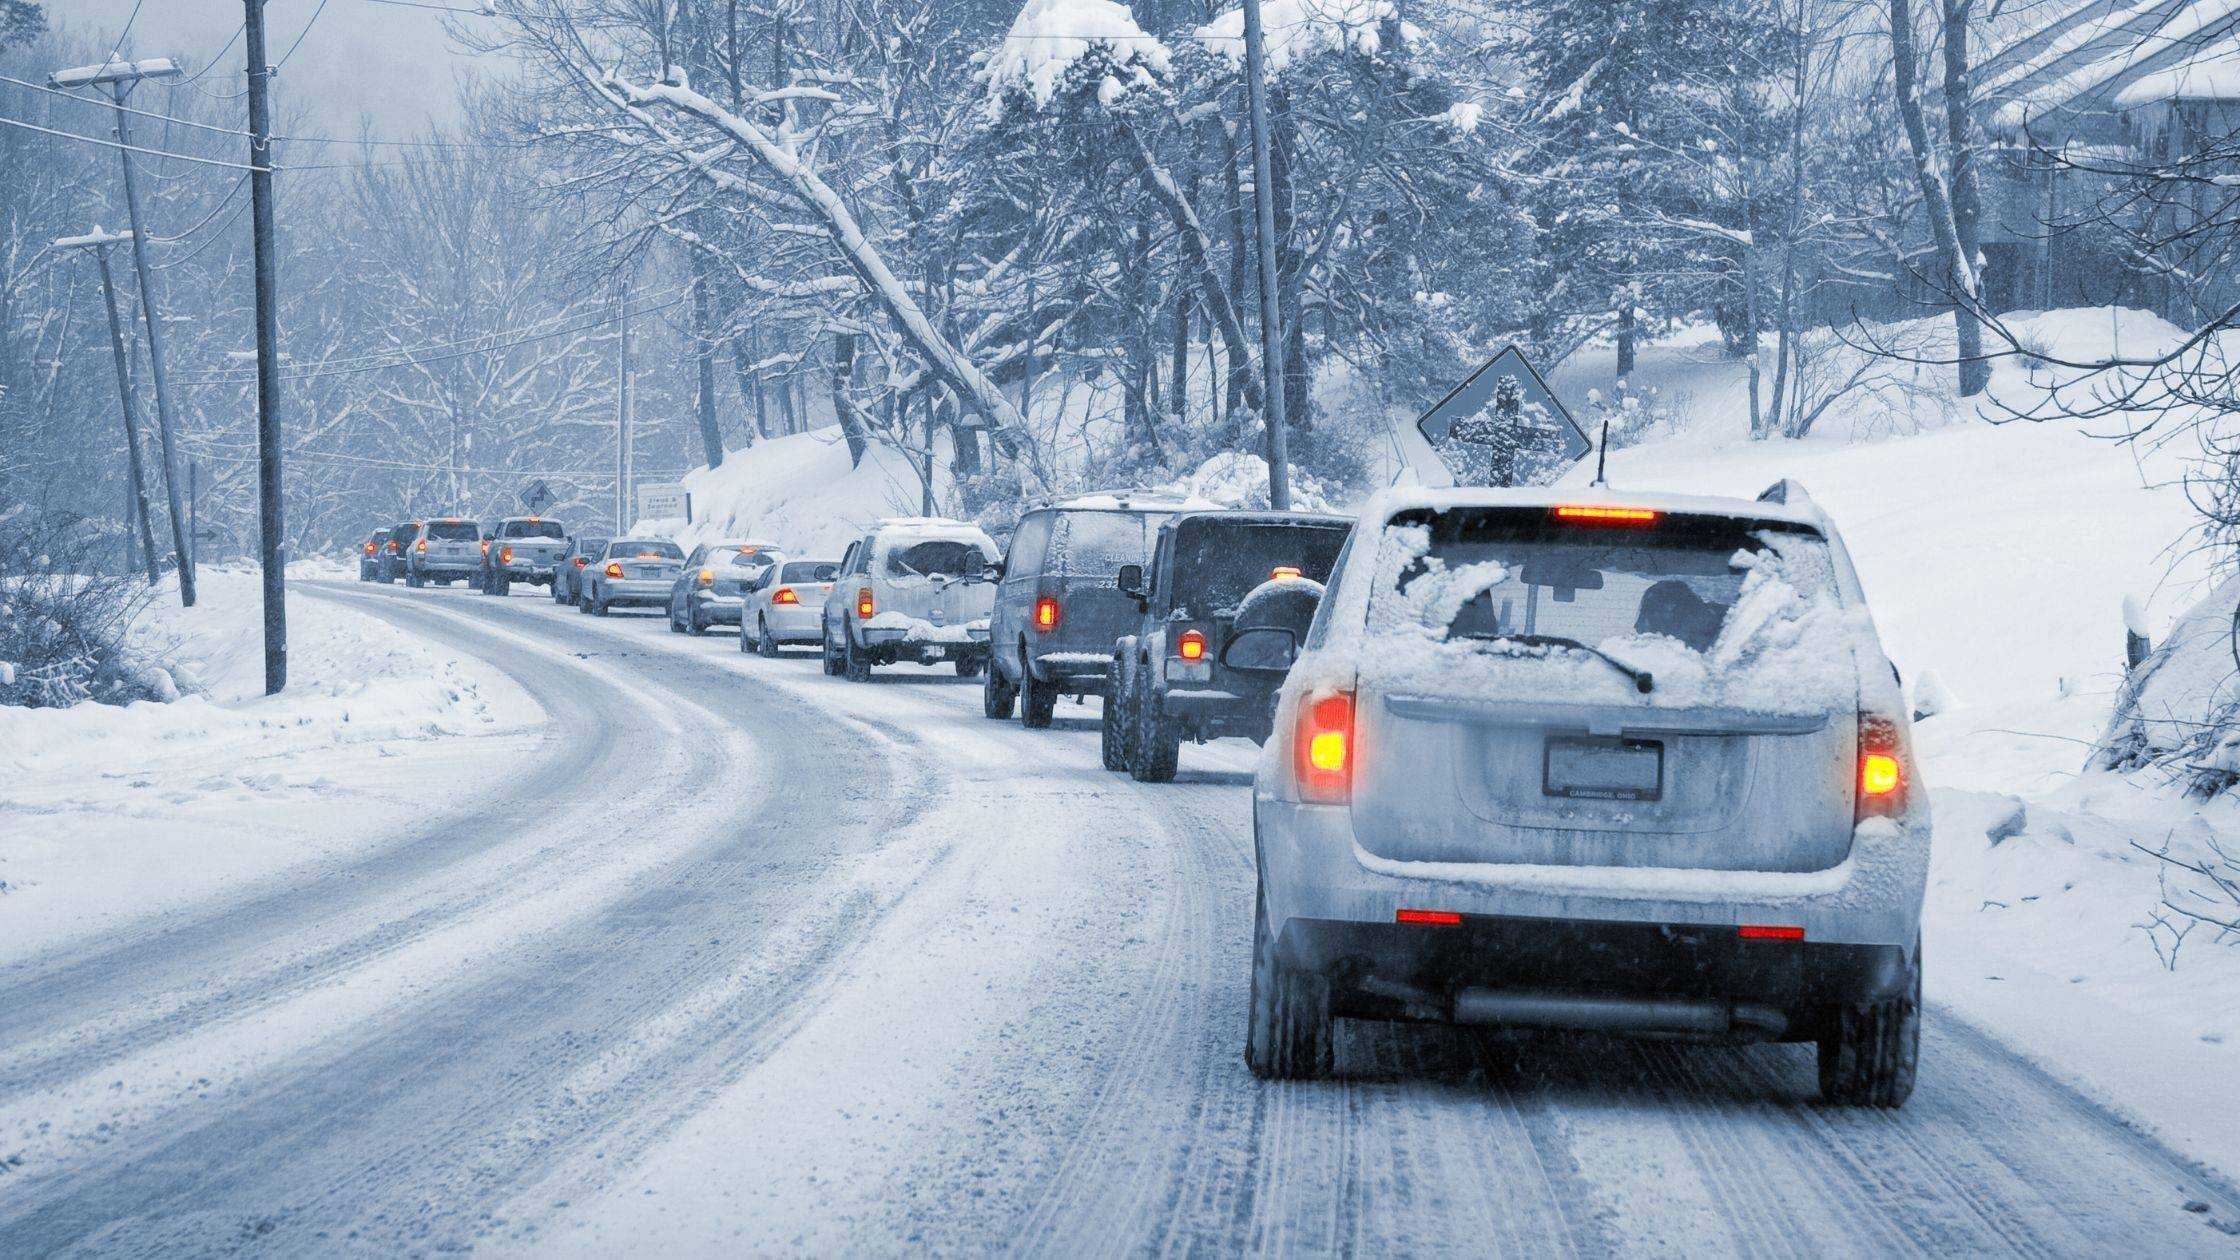 Best Winter Tires For Safer Driving in Snow